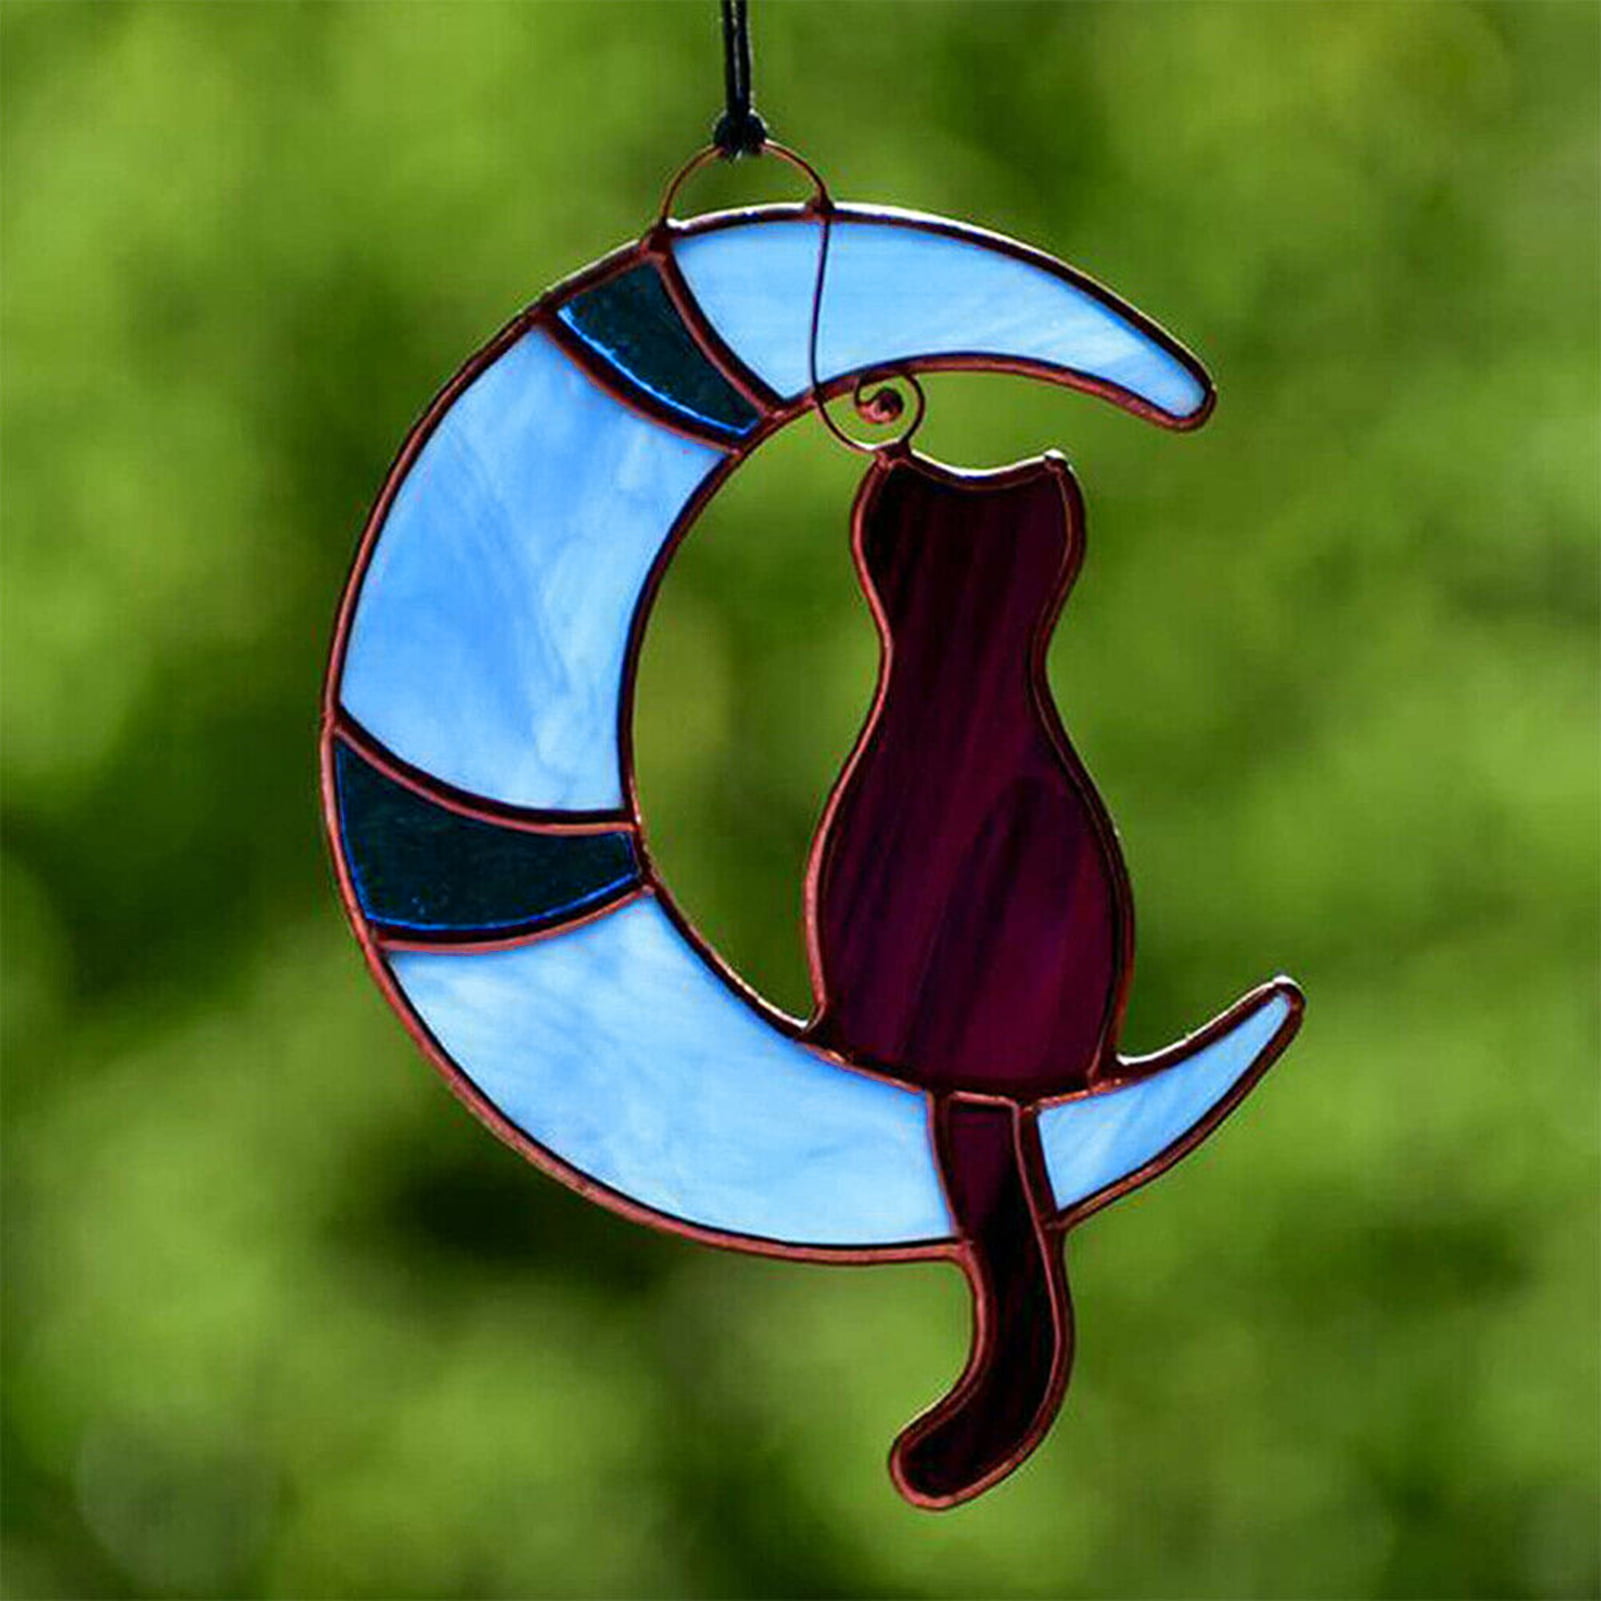 Pink water glass stained glass moon sun catcher for windows stained glass moon sun catcher stained glass art moon sun catcher